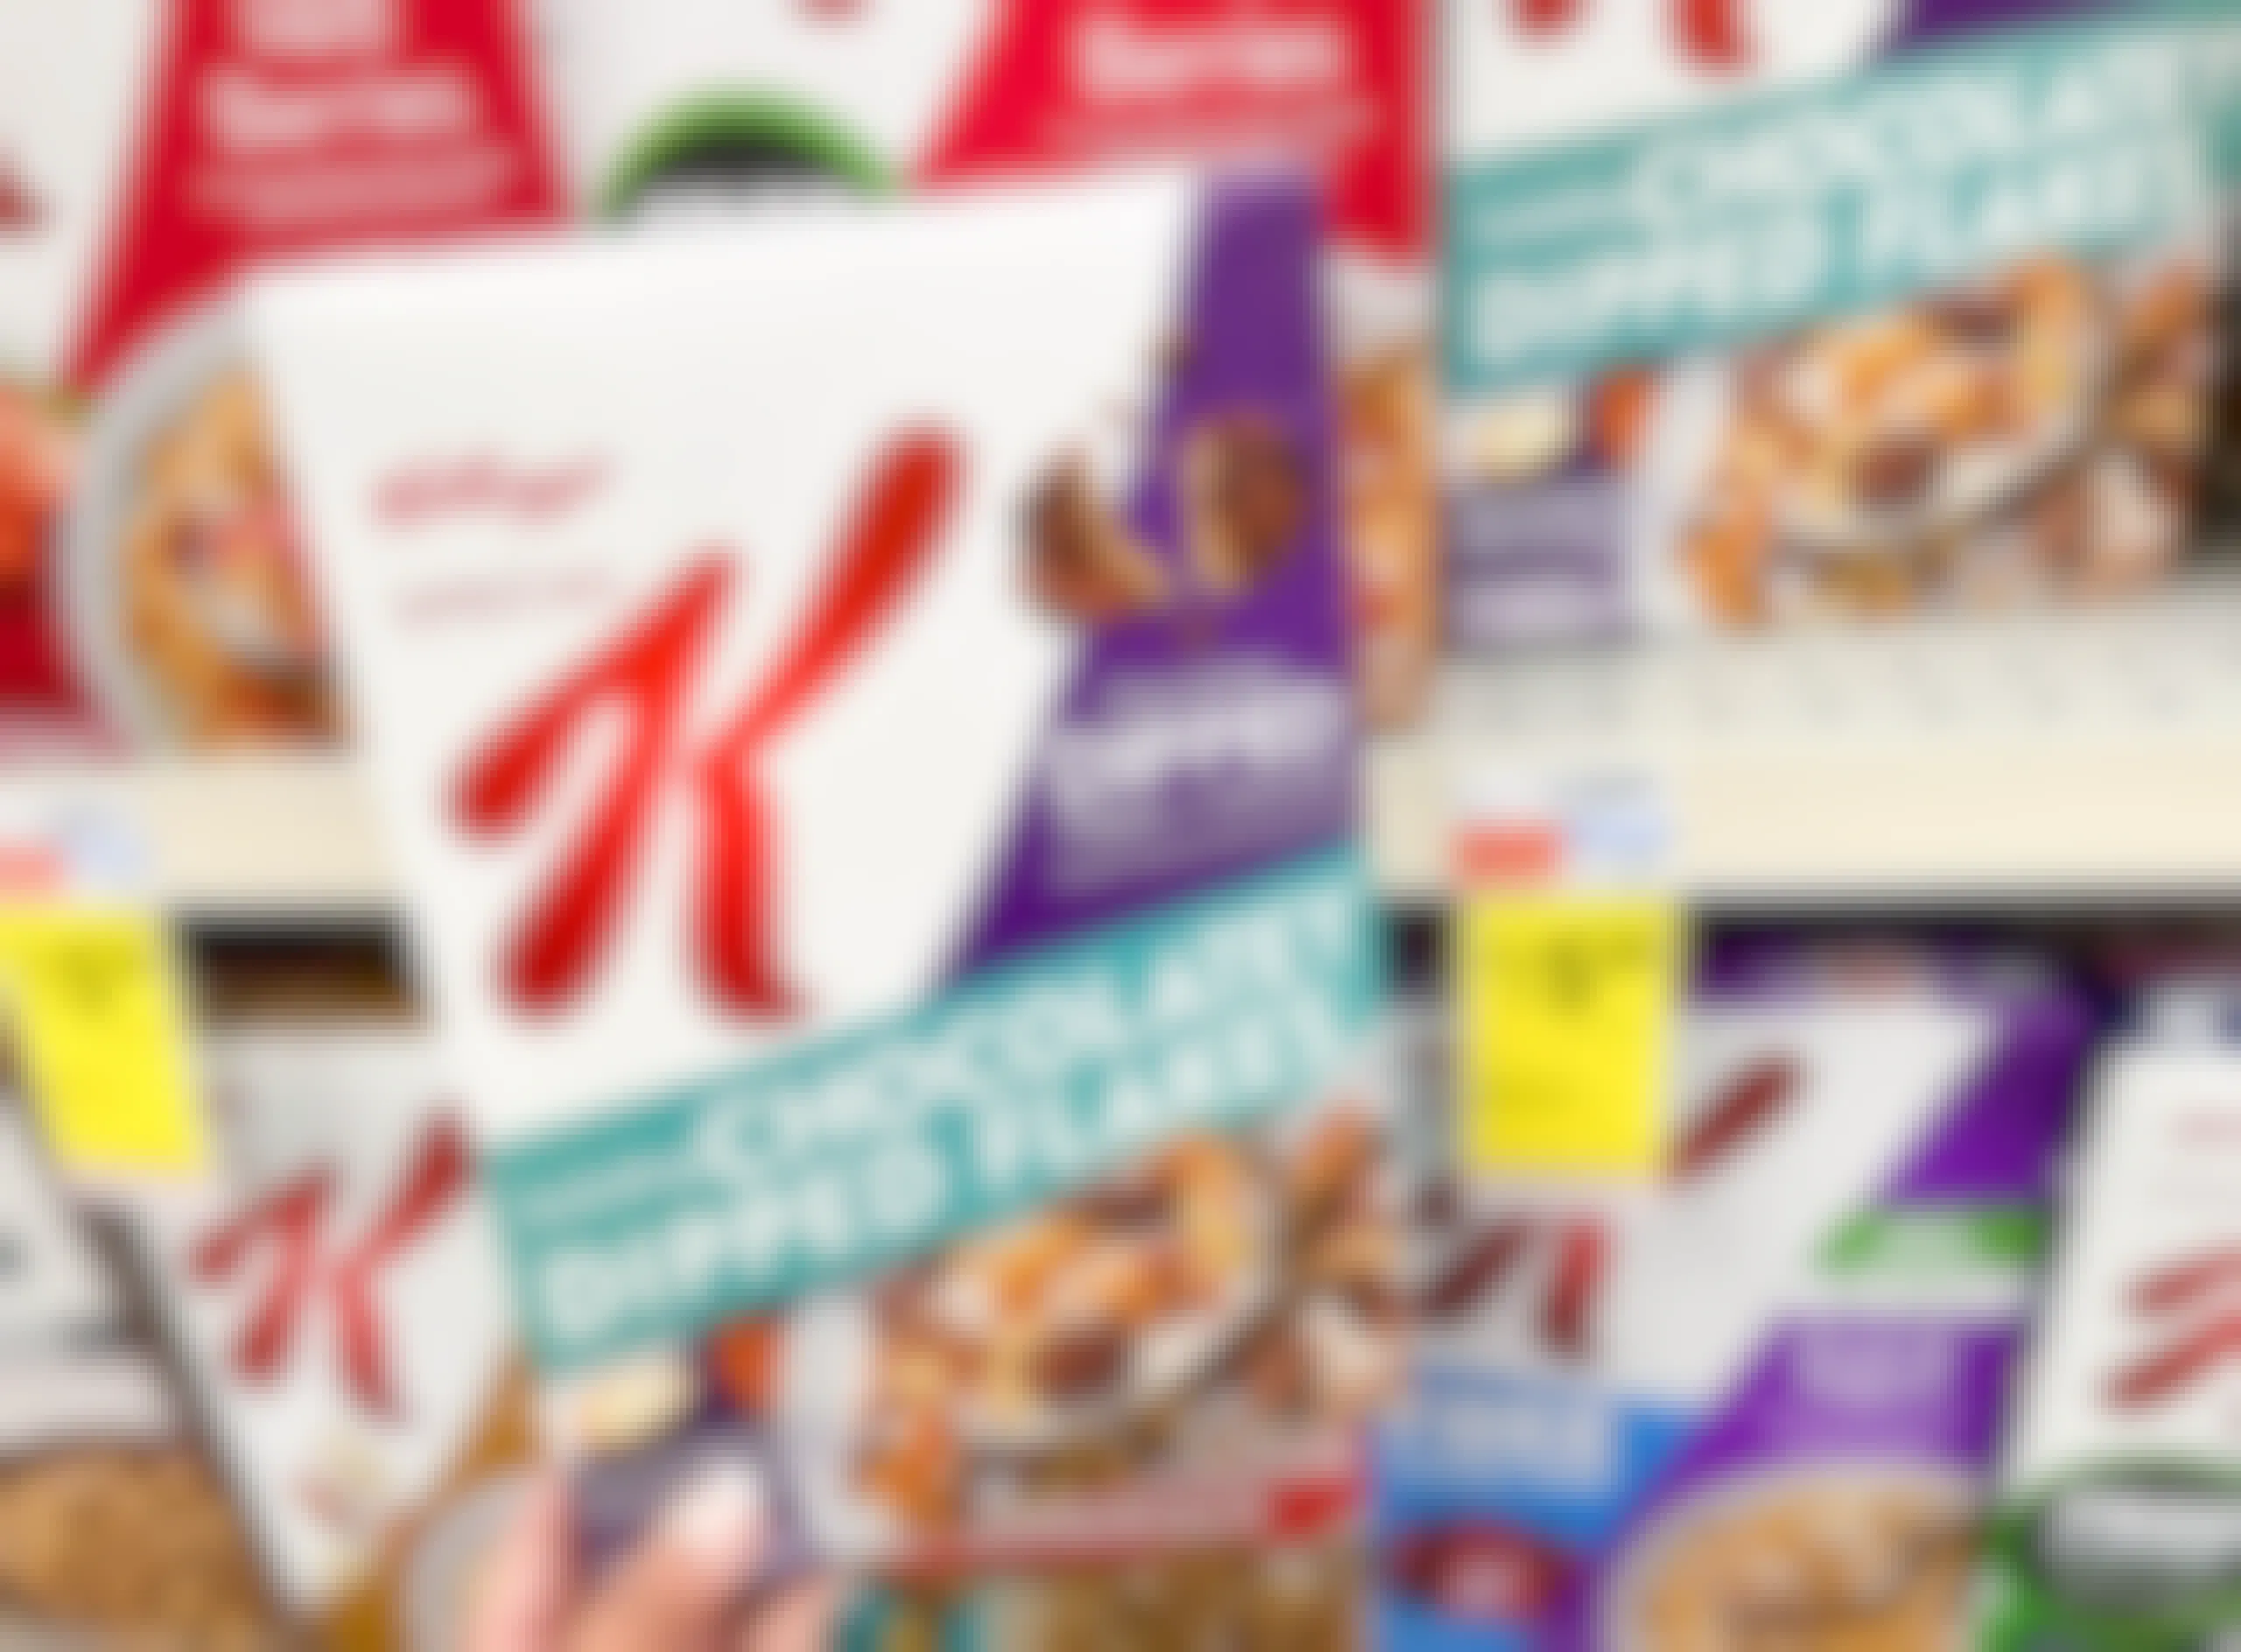 hand holding box of Special K cereal next to sales tag